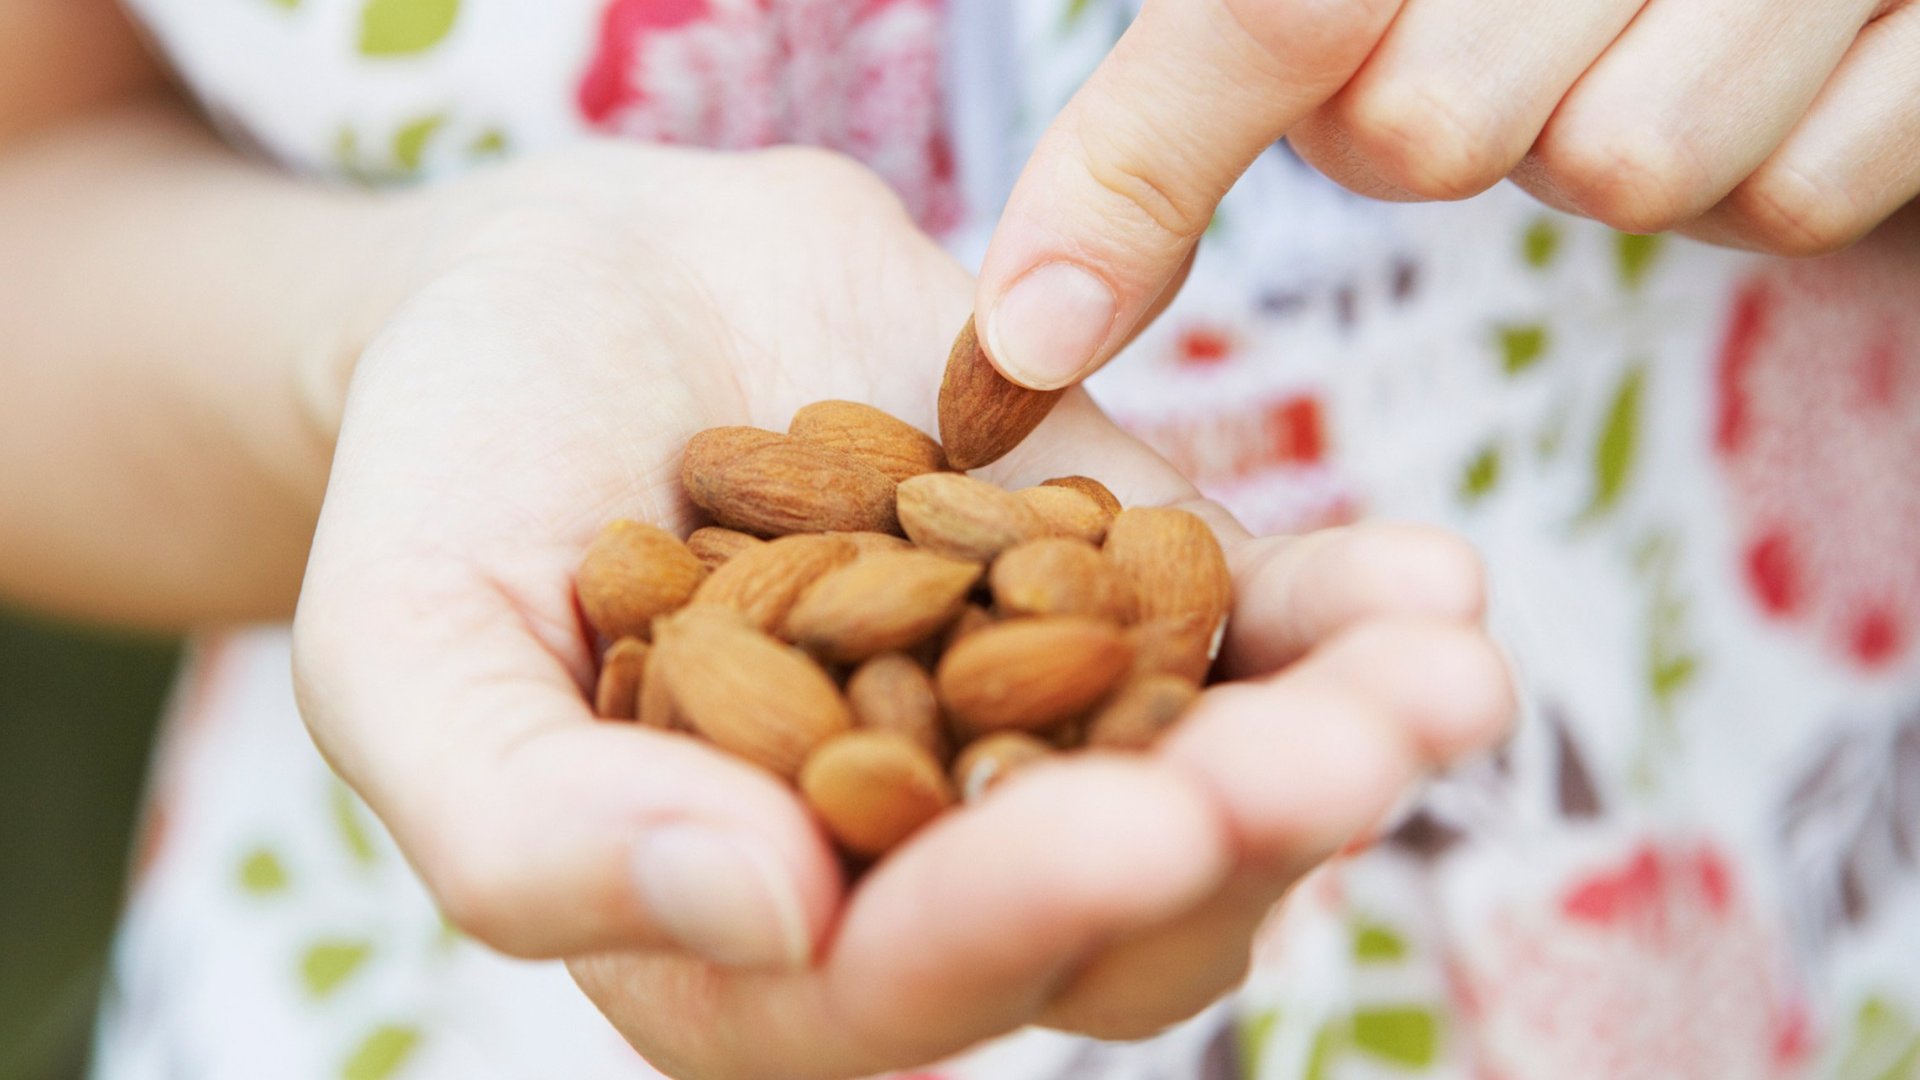 Eating Nuts Makes You Live Much Longer